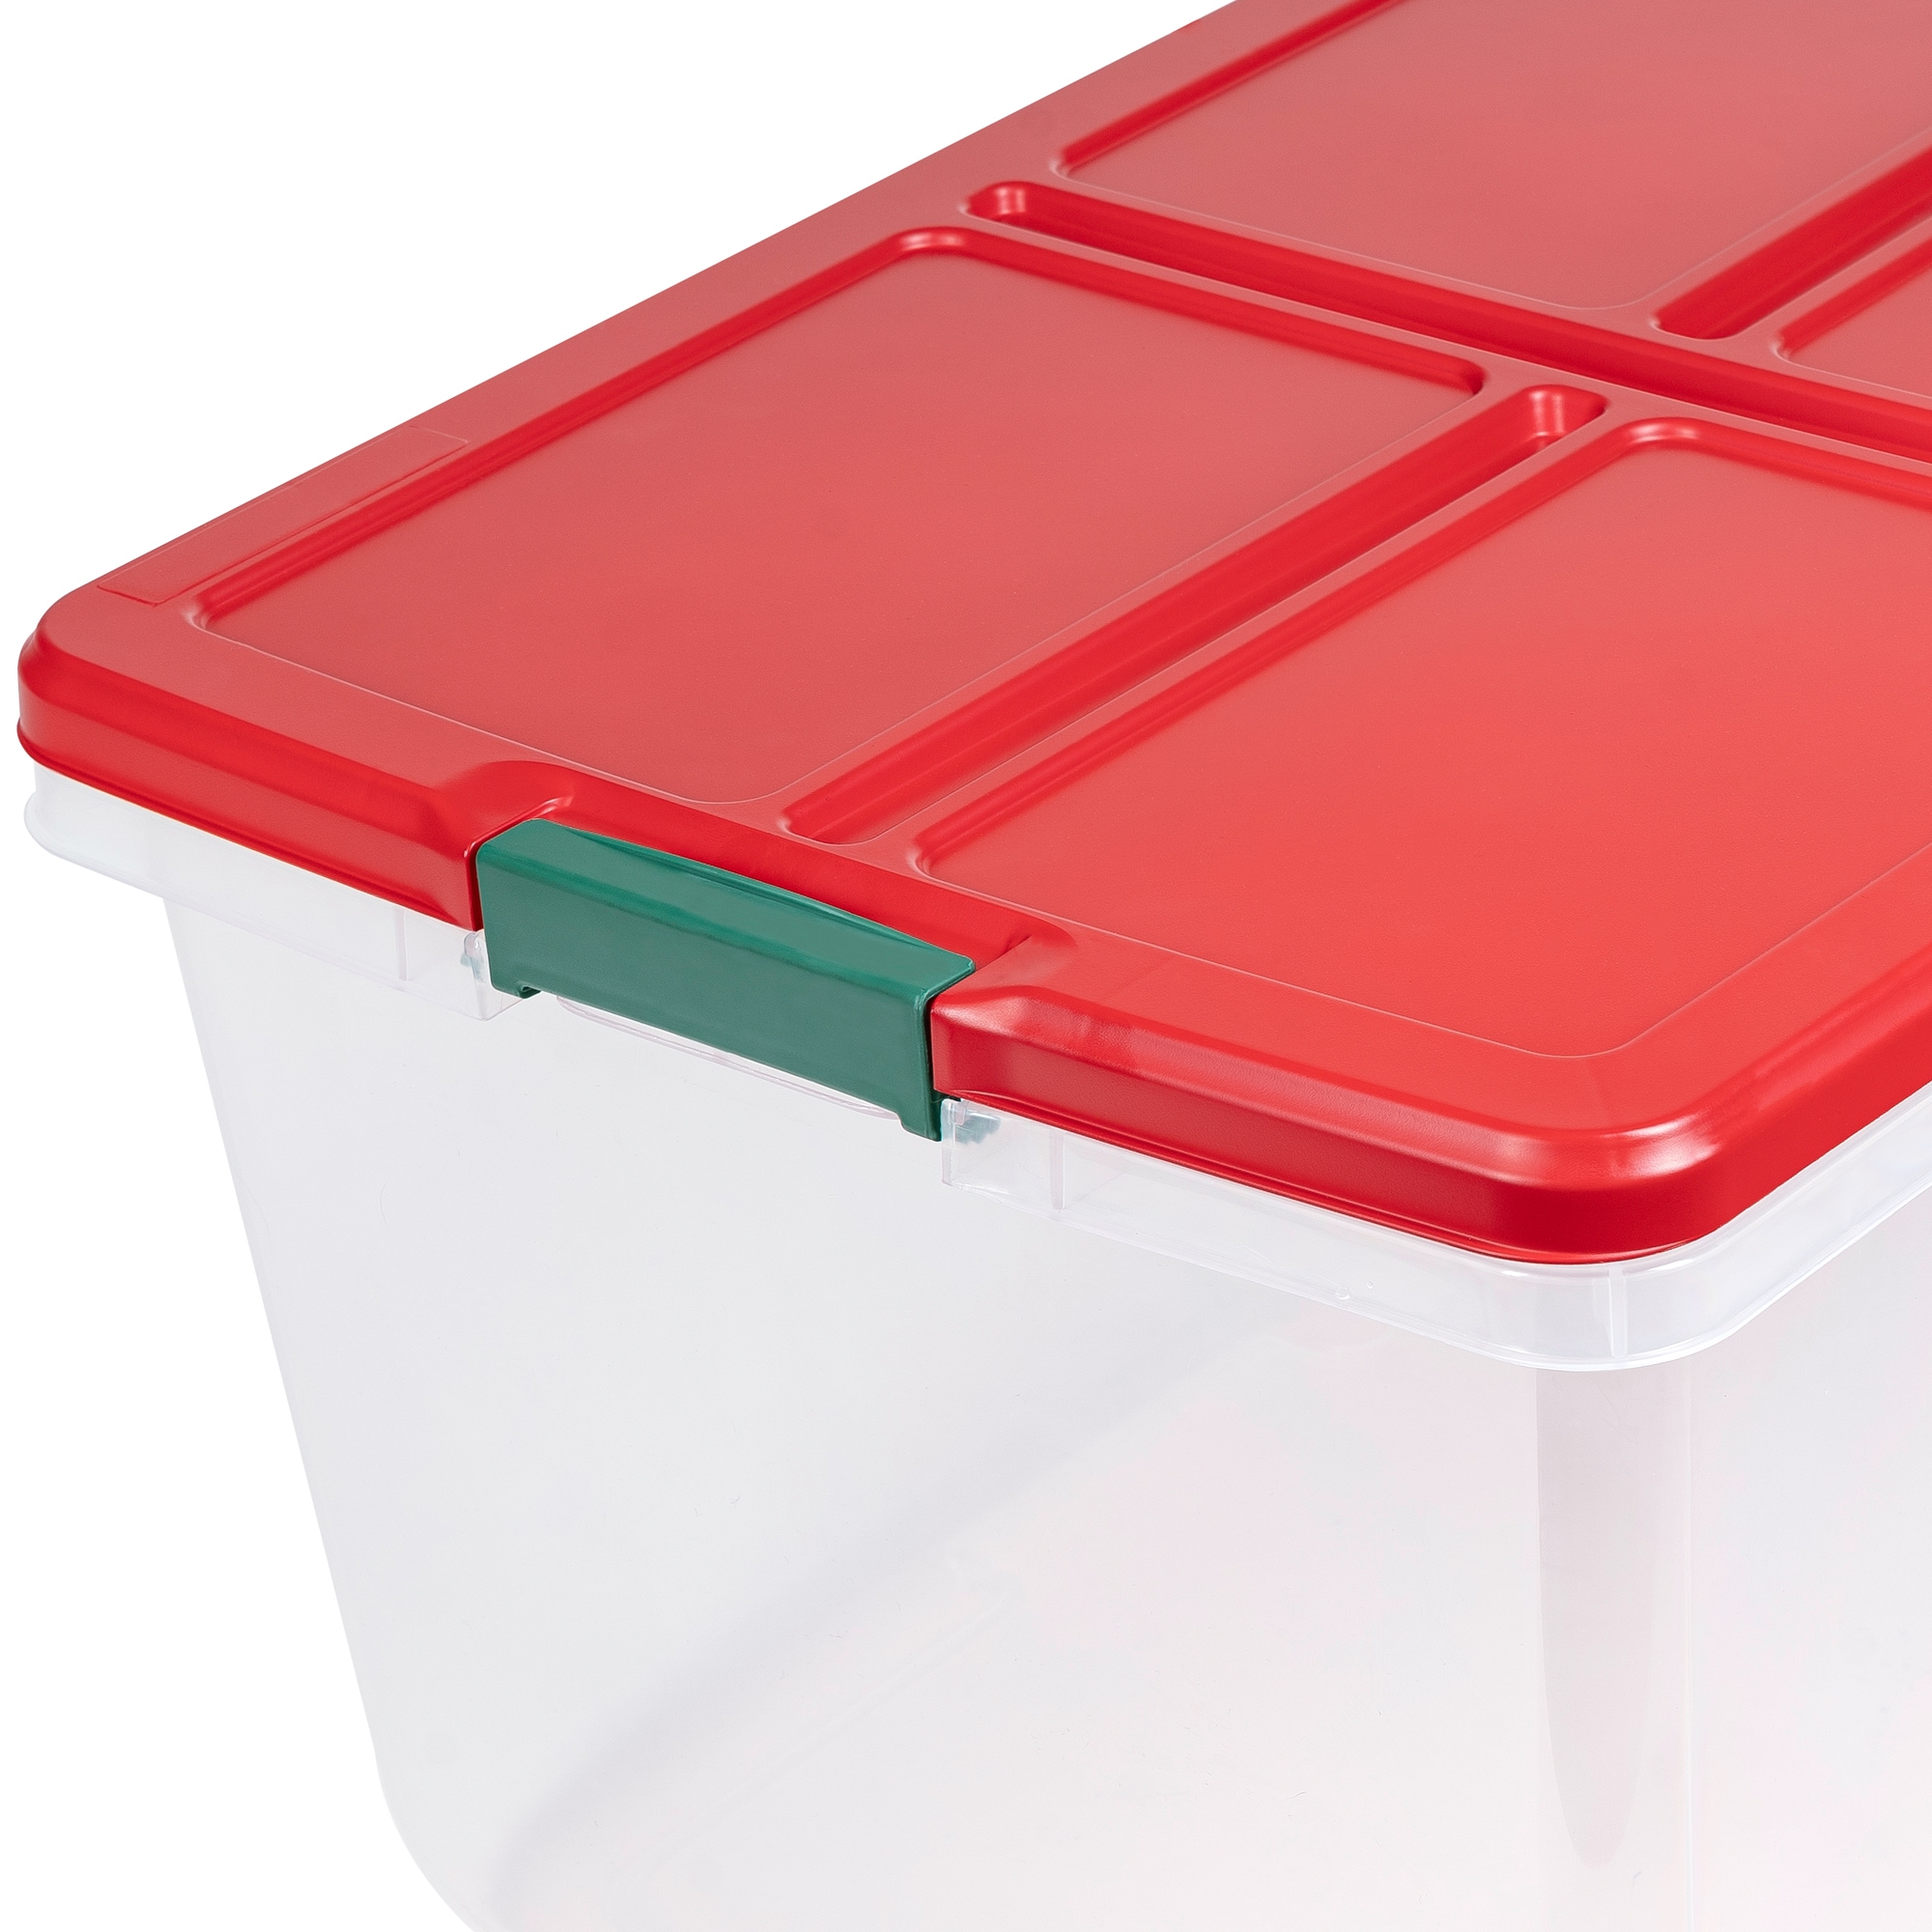 Red Large Plastic Storage Bin, 1 - Pay Less Super Markets